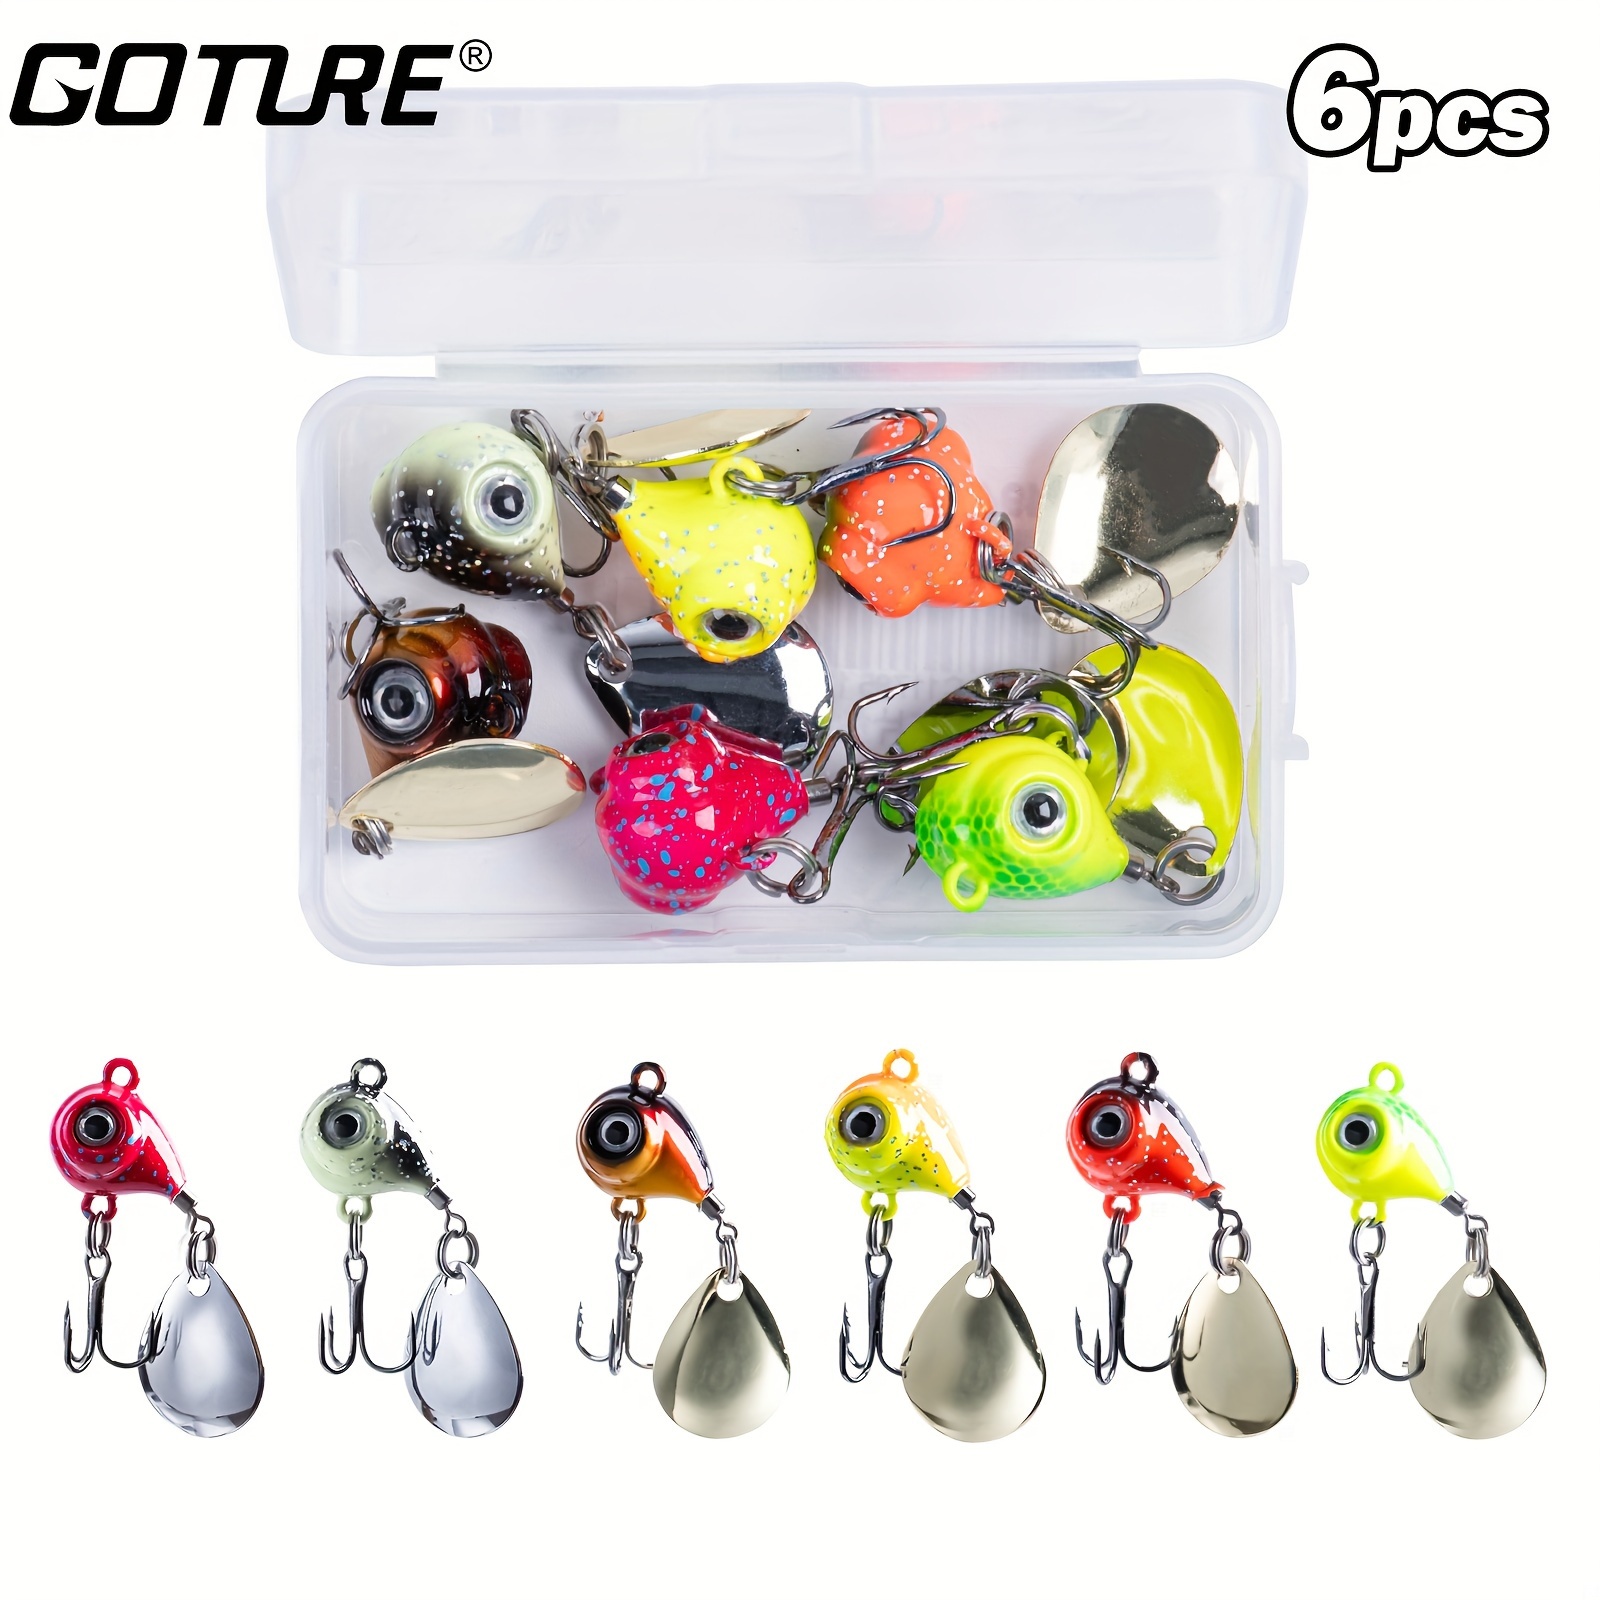 12pcs Blade Bait Fishing Lures Ice Fishing Jigs Single Hook Spoon Lures  Metal Vib Bass Salmon Walleye Pike Perch Crappie, Shop The Latest Trends